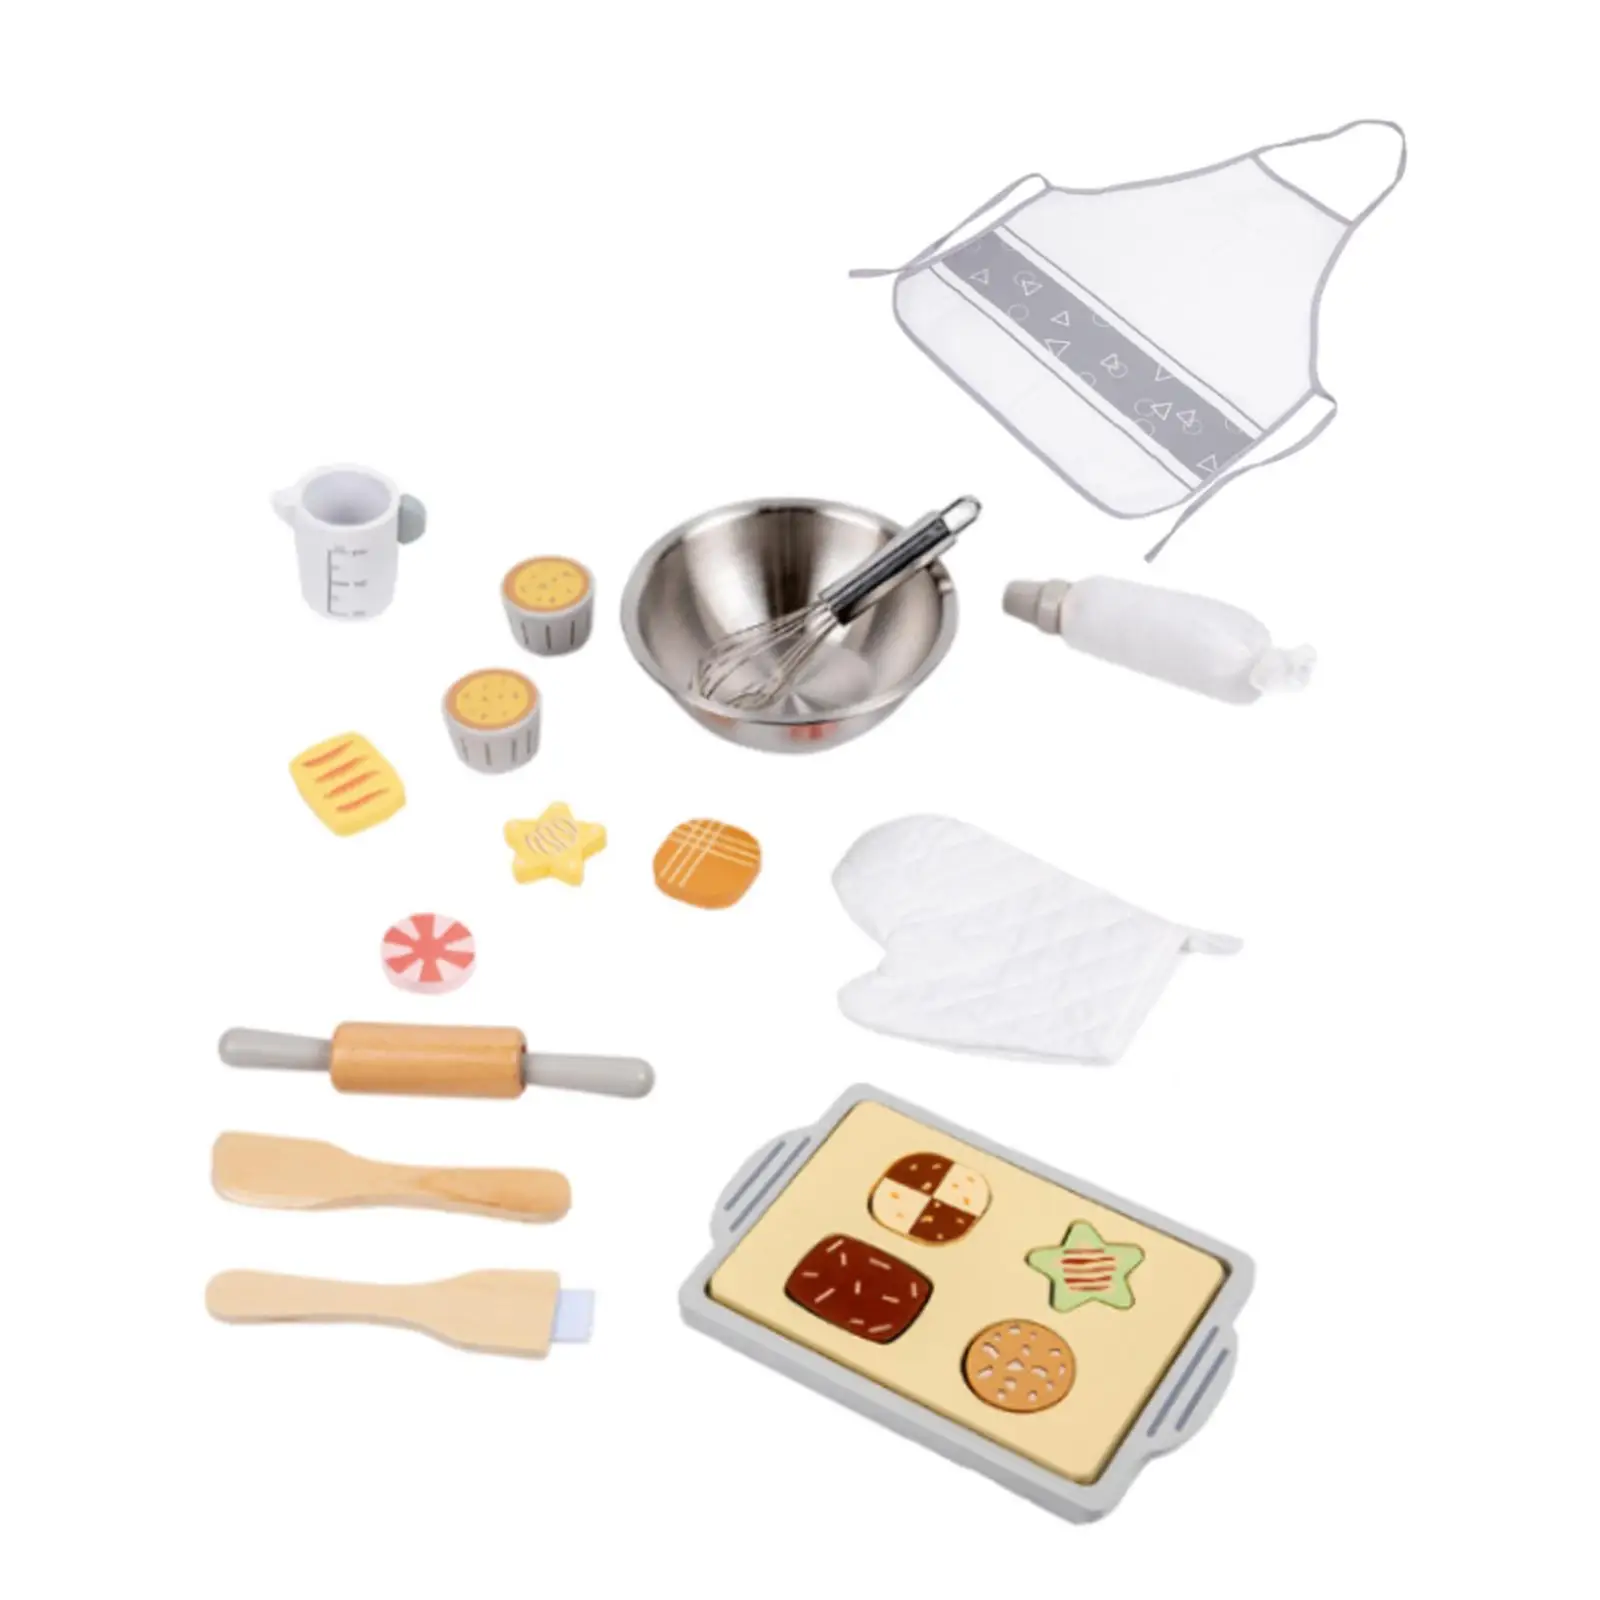 Kids Baking Pretend Toy Learning and Developmental Kids Cooking Set for Kids